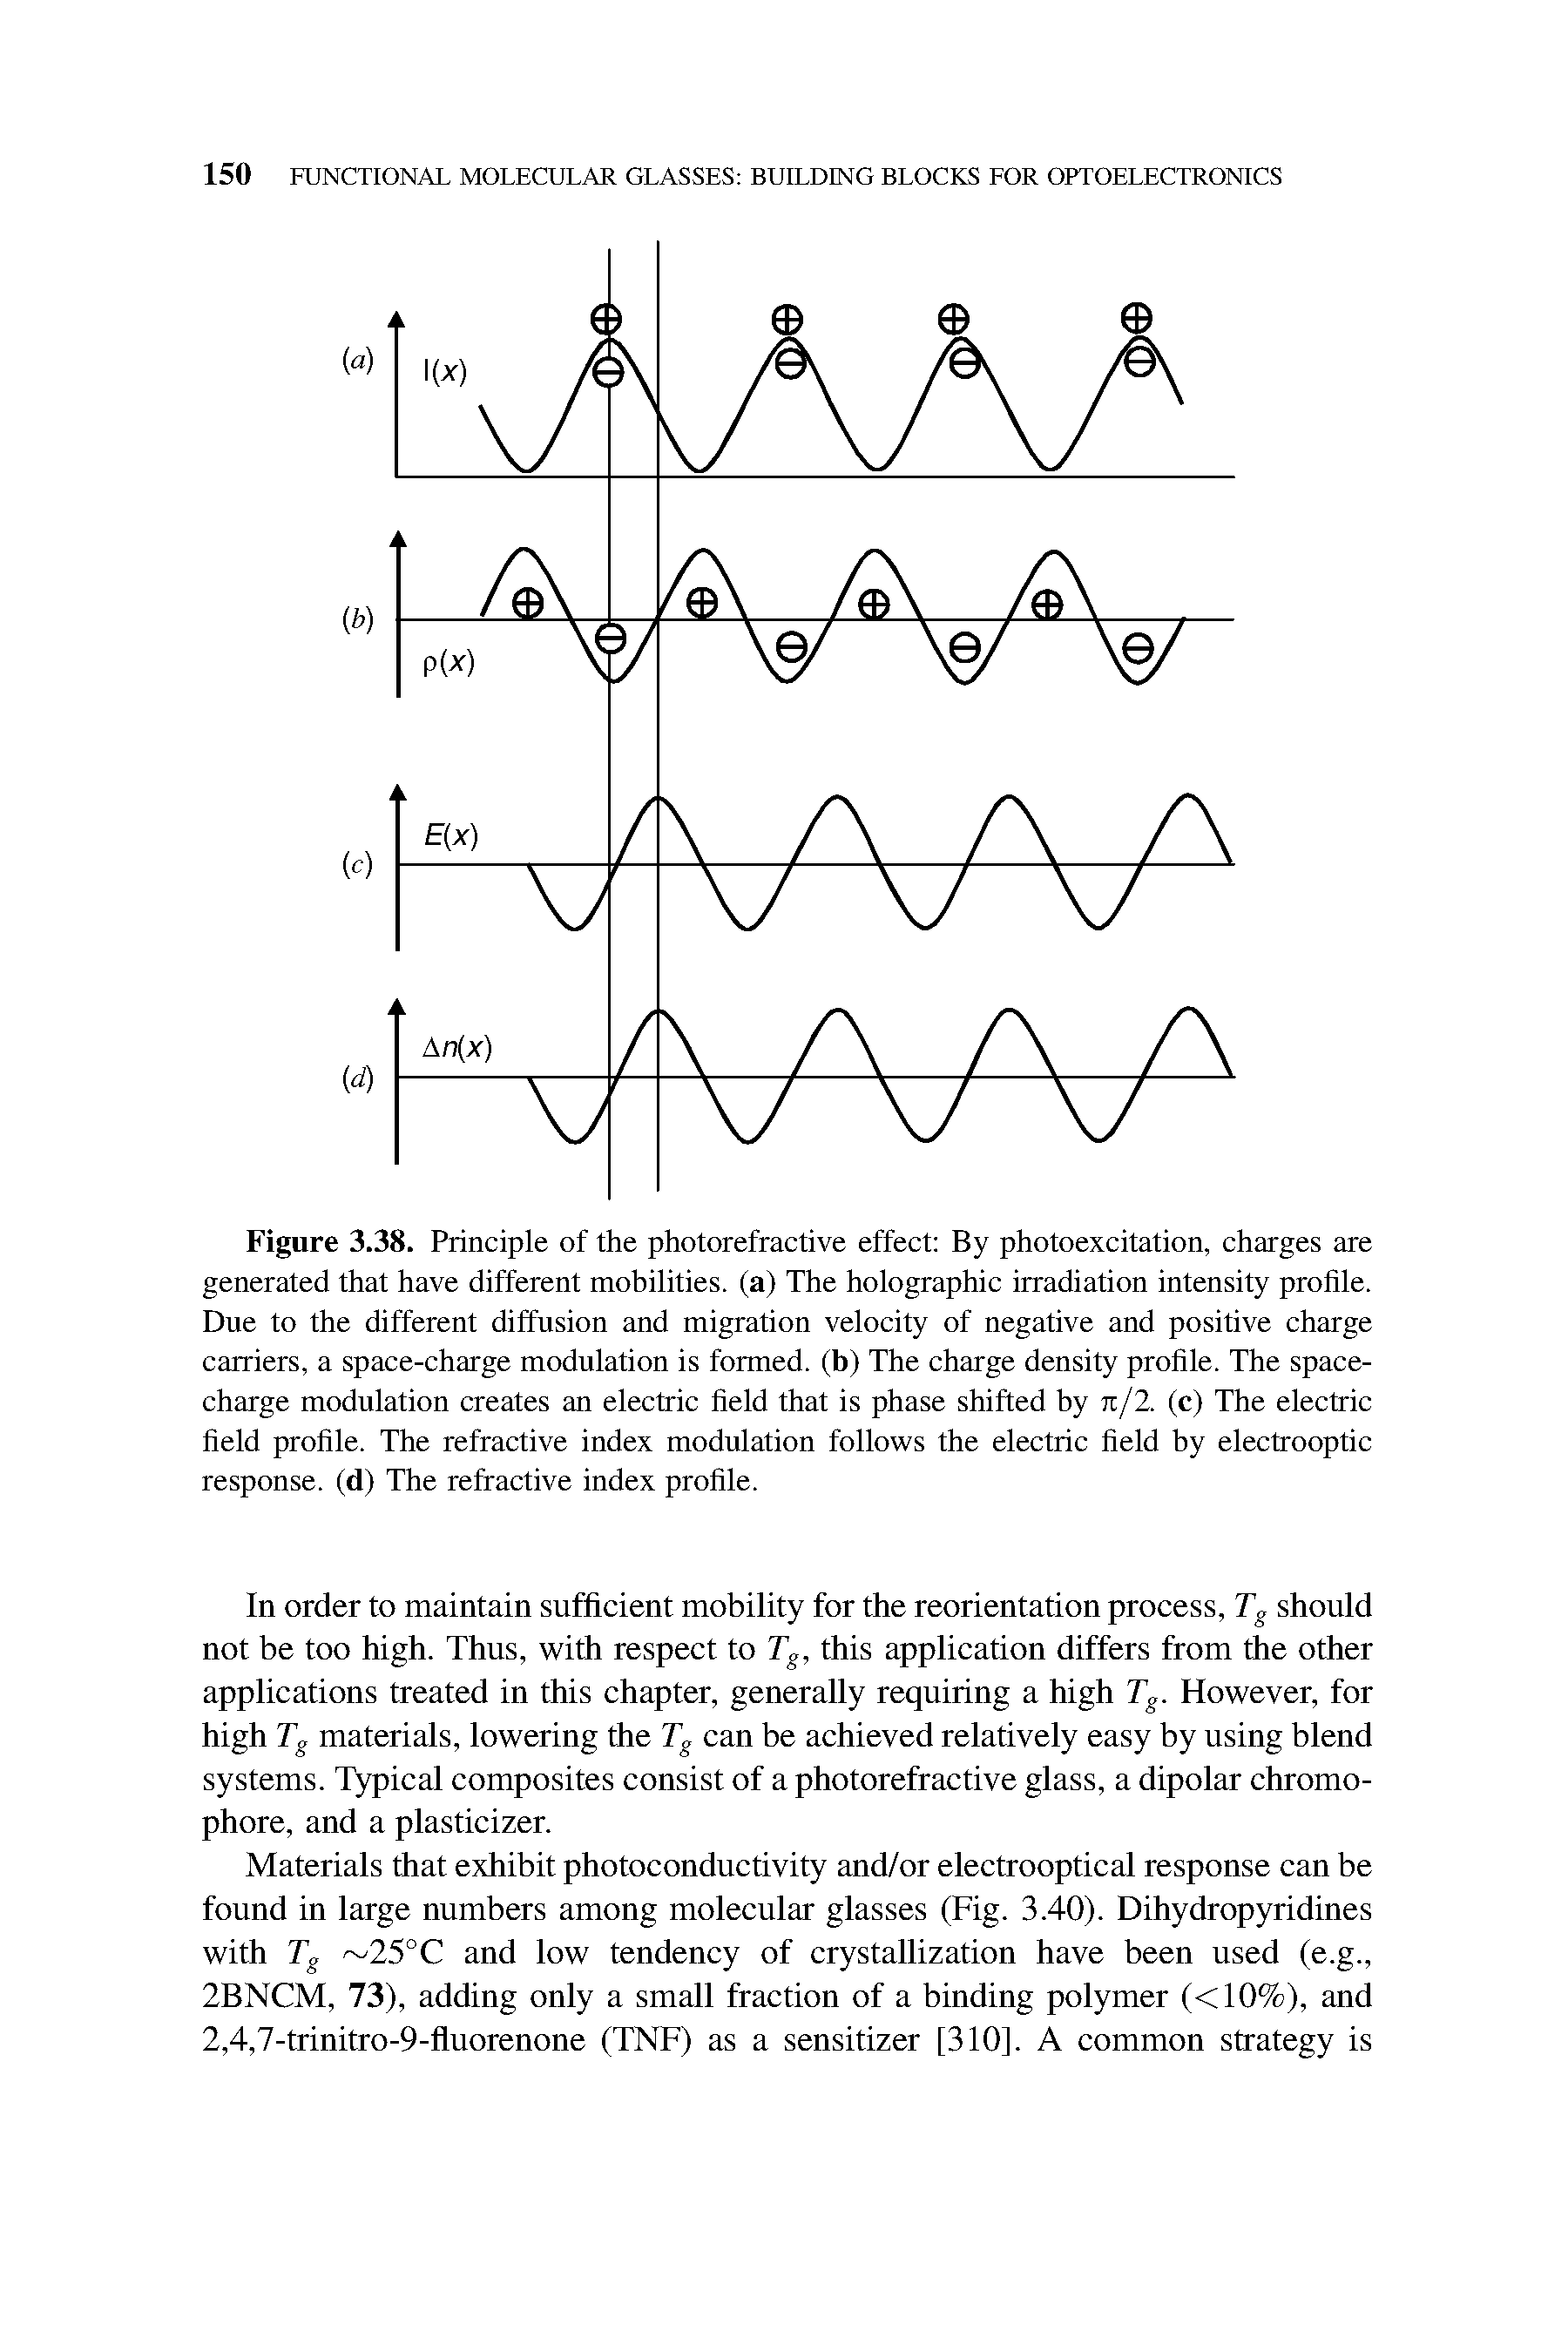 Figure 3.38. Principle of the photorefractive effect By photoexcitation, charges are generated that have different mobilities, (a) The holographic irradiation intensity proHle. Due to the different diffusion and migration velocity of negative and positive charge carriers, a space-charge modulation is formed, (b) The charge density proHle. The space-charge modulation creates an electric Held that is phase shifted by 7t/2. (c) The electric field profile. The refractive index modulation follows the electric field by electrooptic response, (d) The refractive index profile.